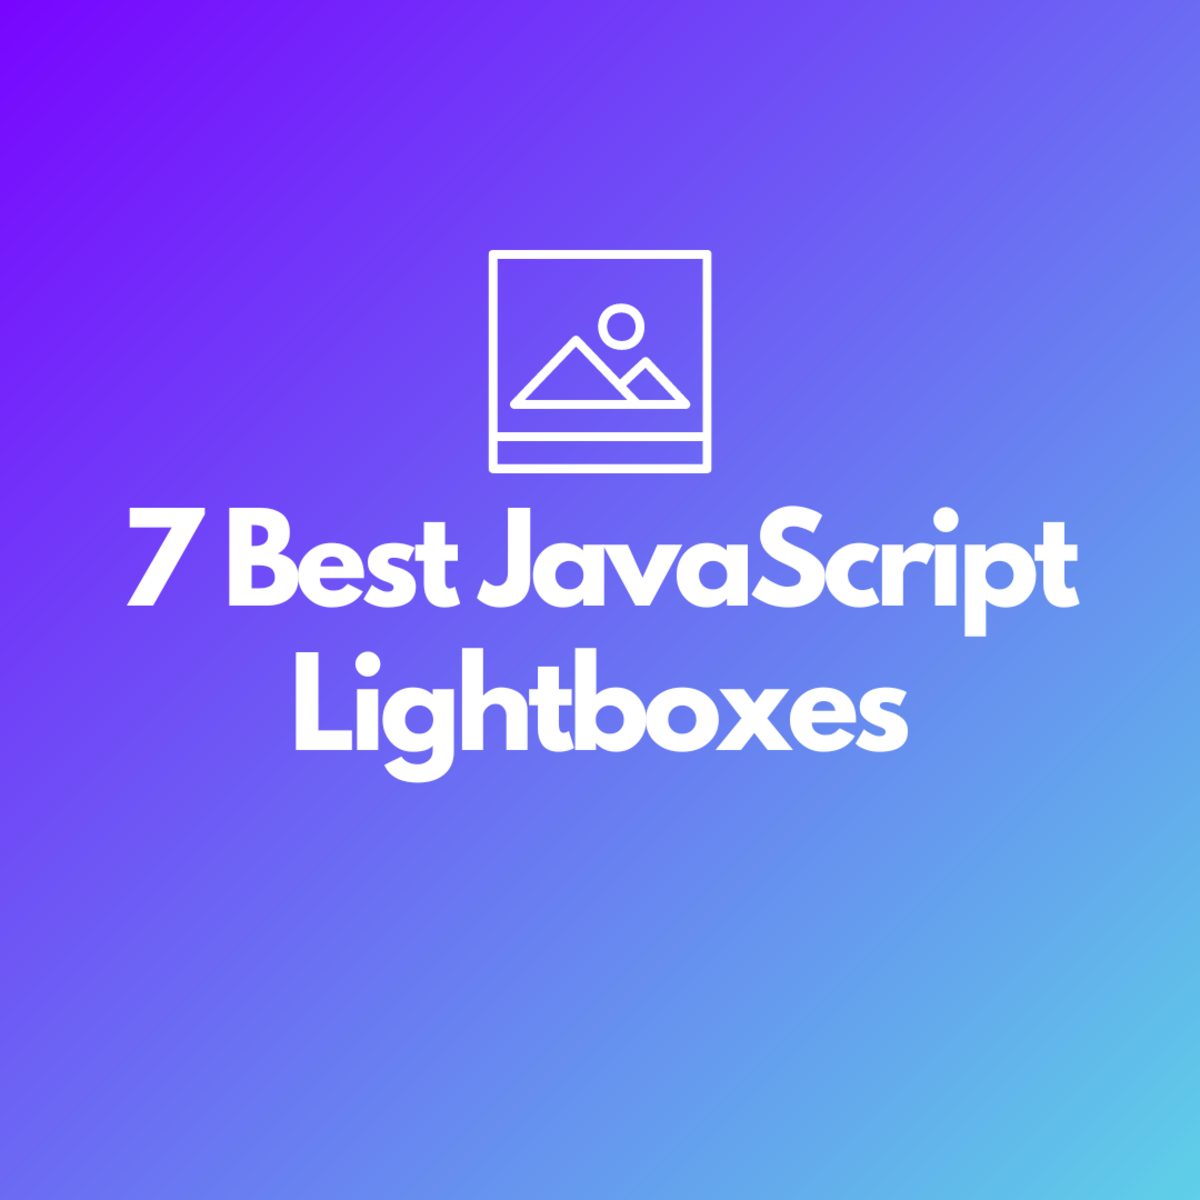 7 Best JavaScript Lightboxes to Check Out: The Ultimate List